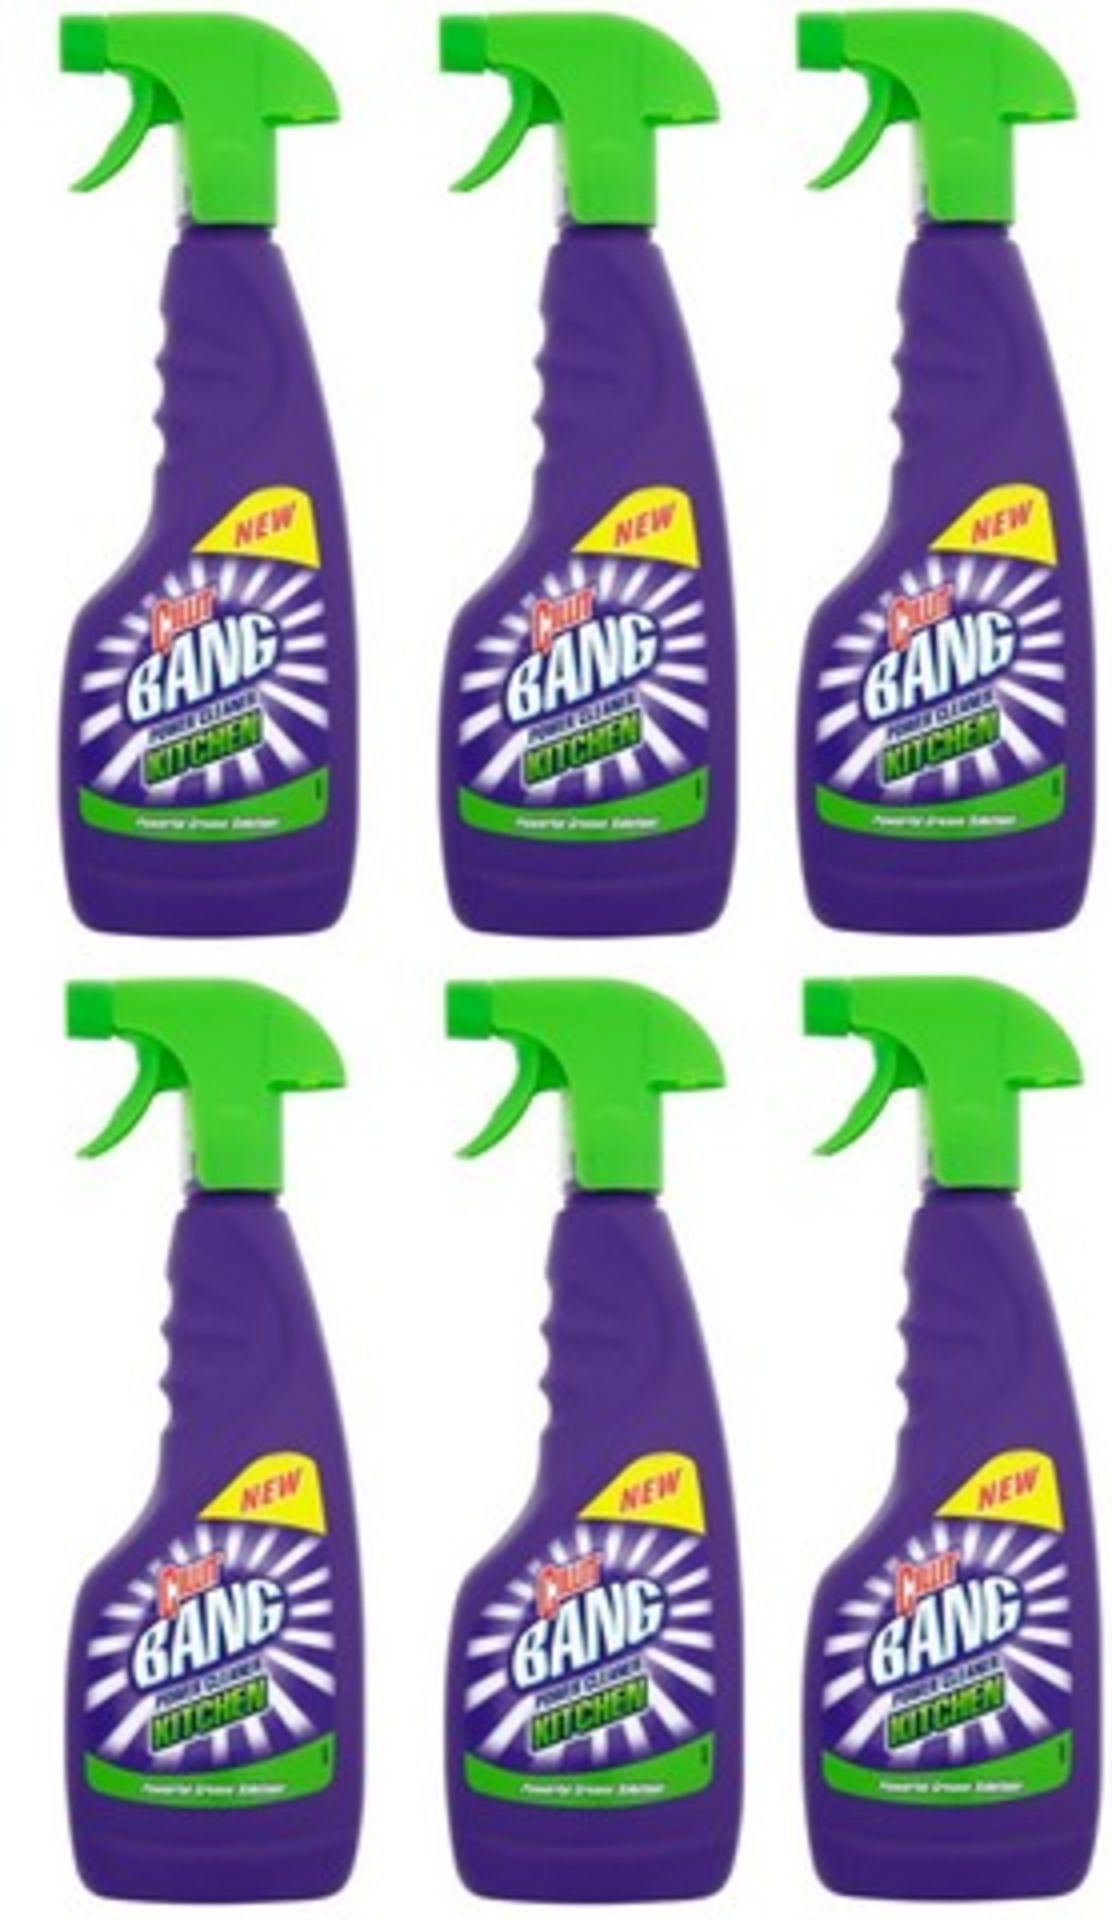 V Brand New A Lot of Six Cillit Bang Power Cleaner 440ml - Kitchen Cleaner - Powerful Grease